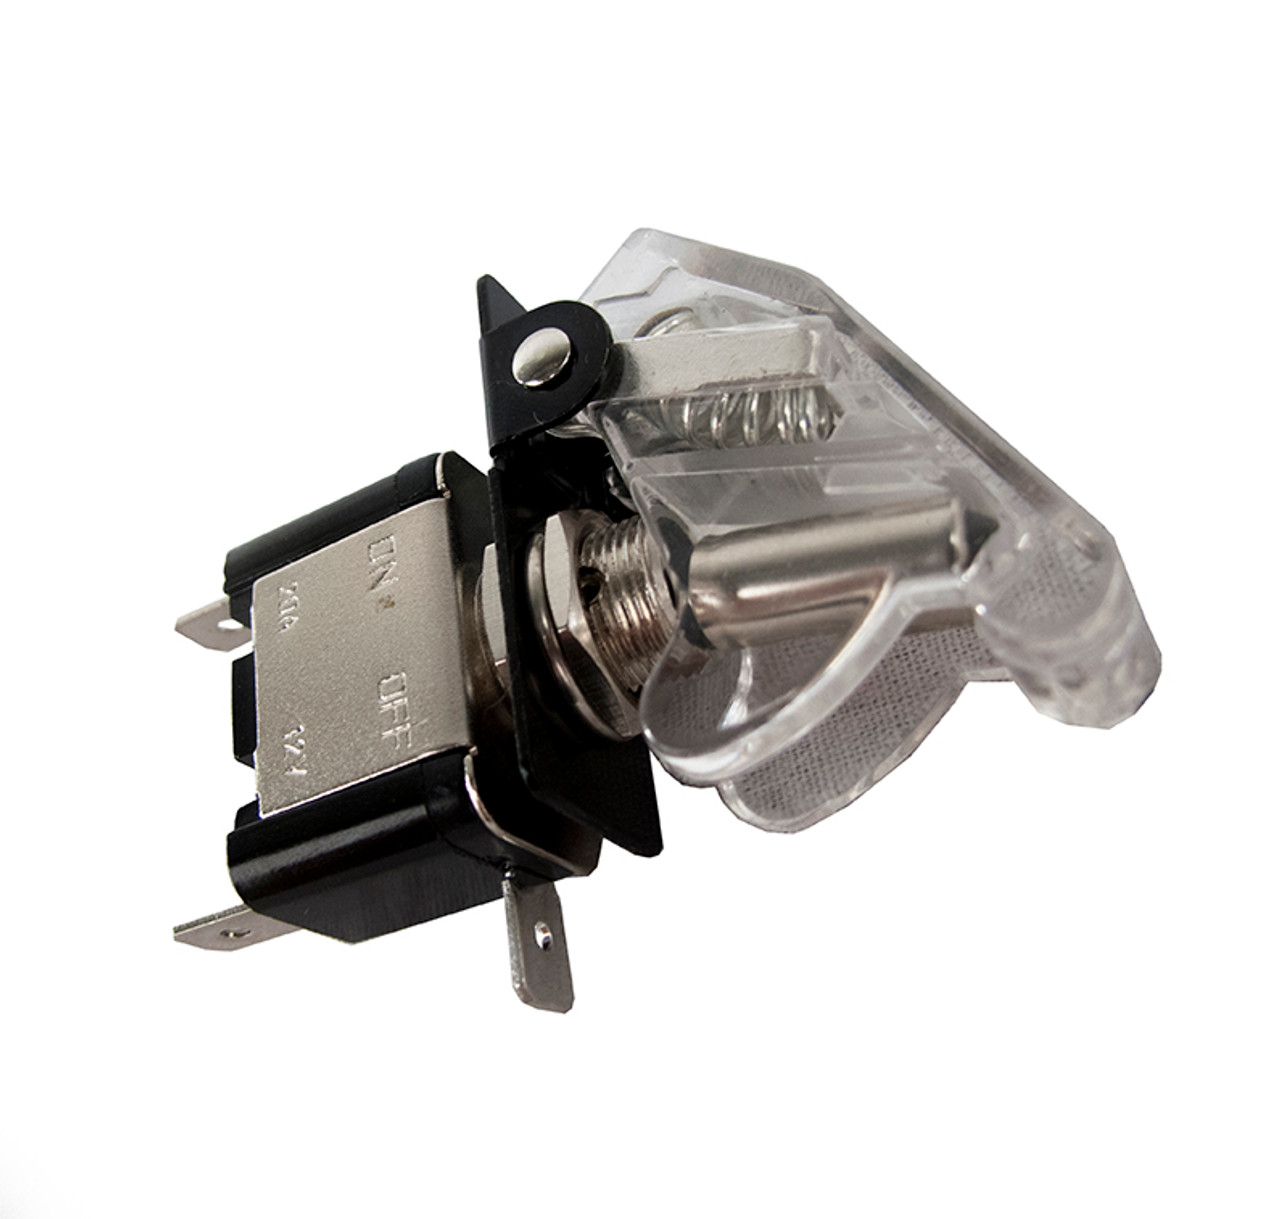 12 Volt LED Toggle Switch White Spring Loaded Safety Cover Comes with Toggle cover Race Sport Lighting